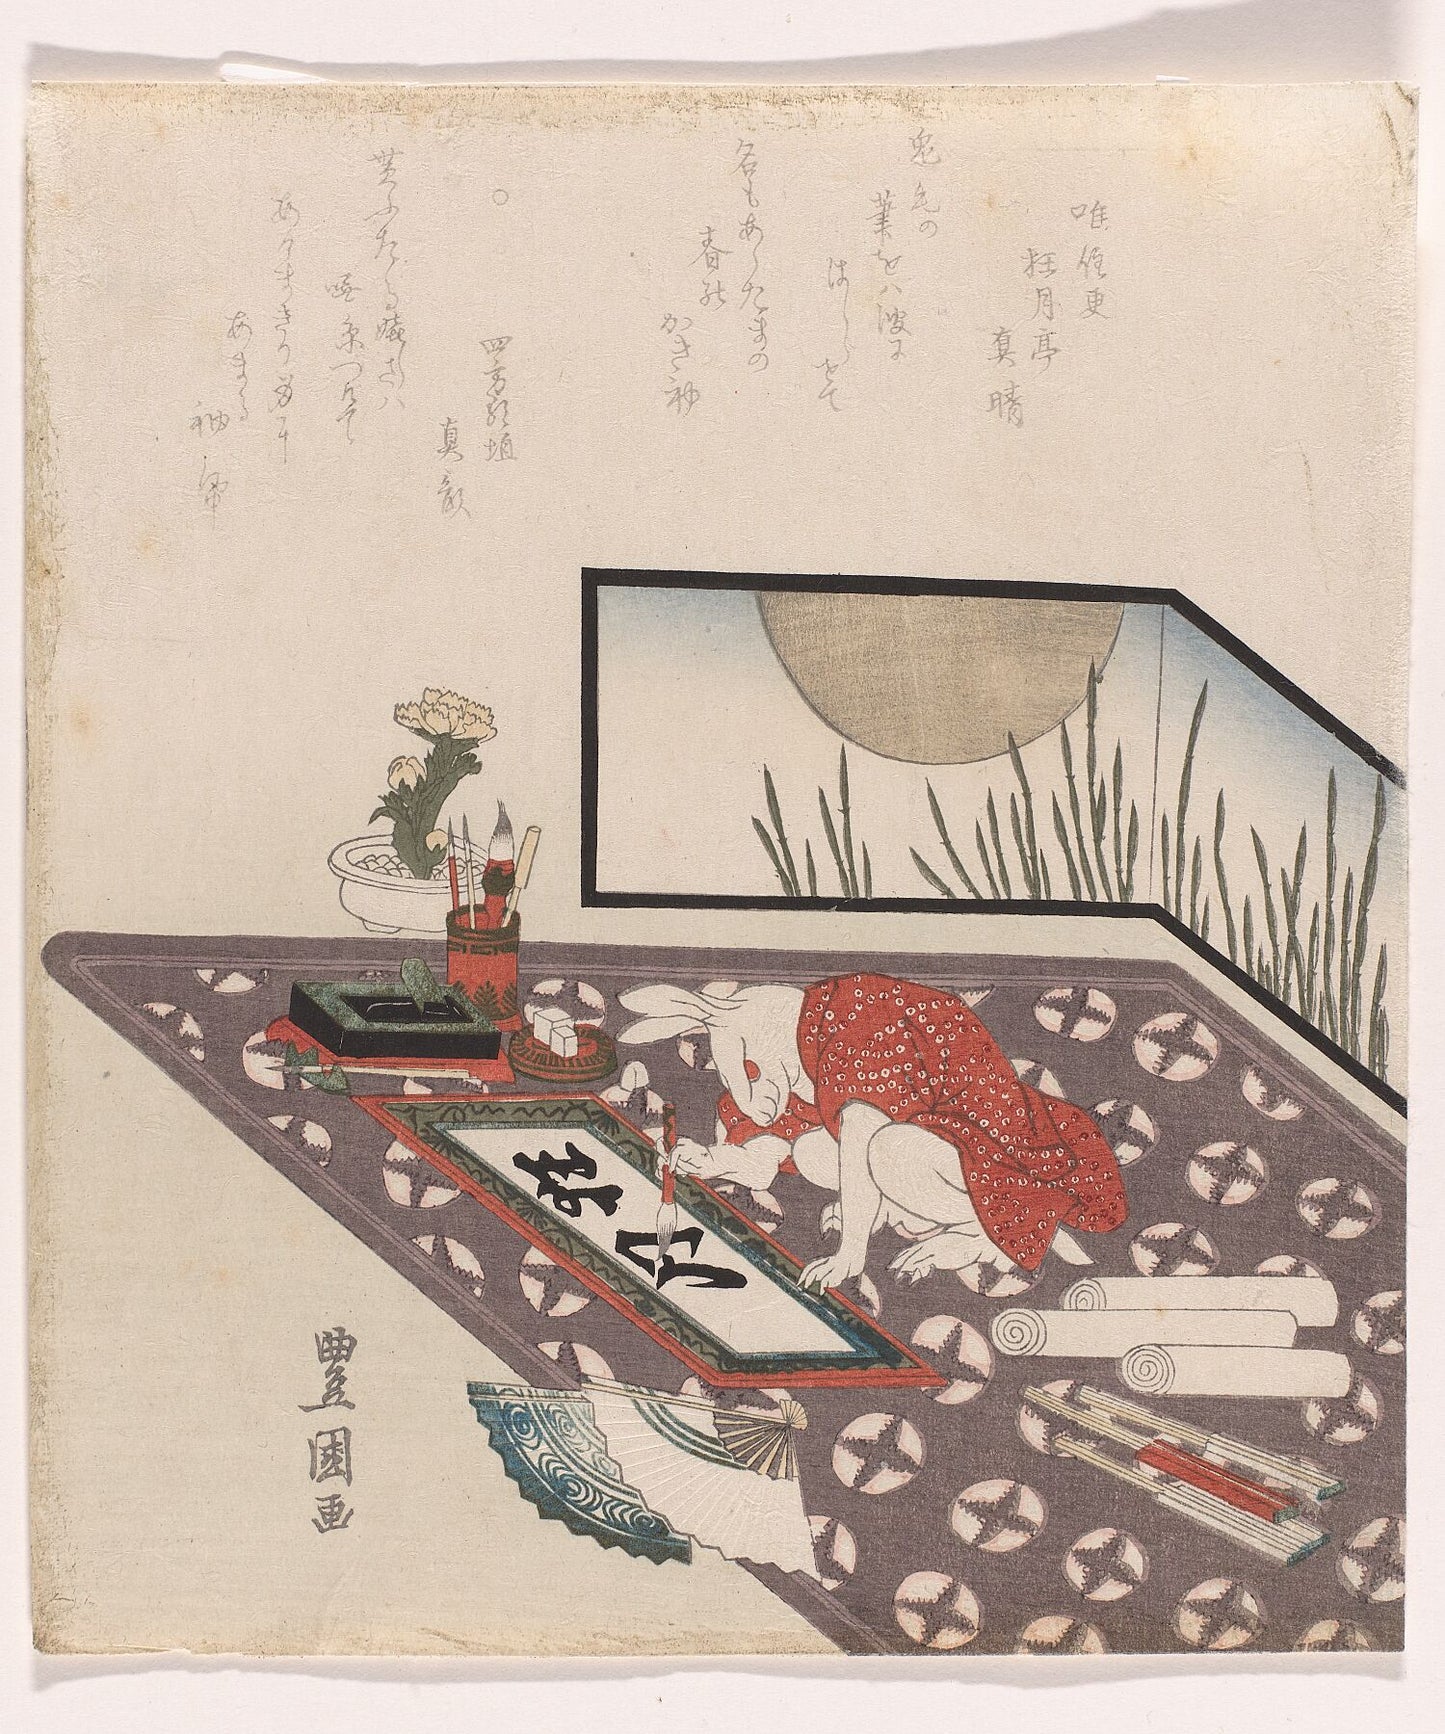 Hare Calligraphy a New Year's Wish for the Year of the Hare by Utagawa Toyokuni - 1819